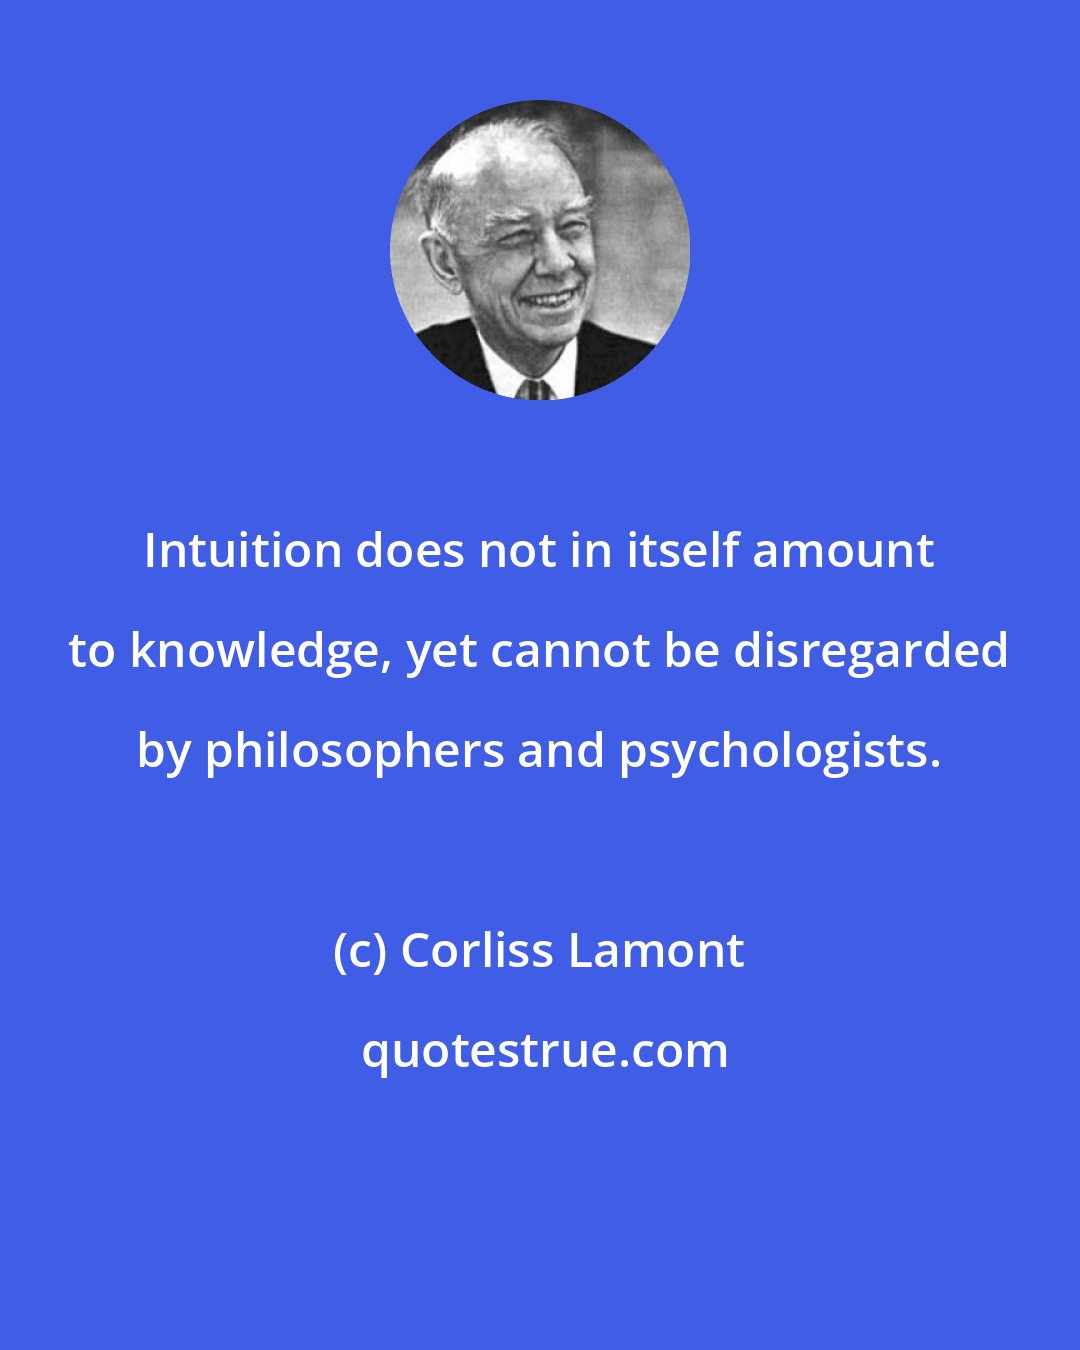 Corliss Lamont: Intuition does not in itself amount to knowledge, yet cannot be disregarded by philosophers and psychologists.